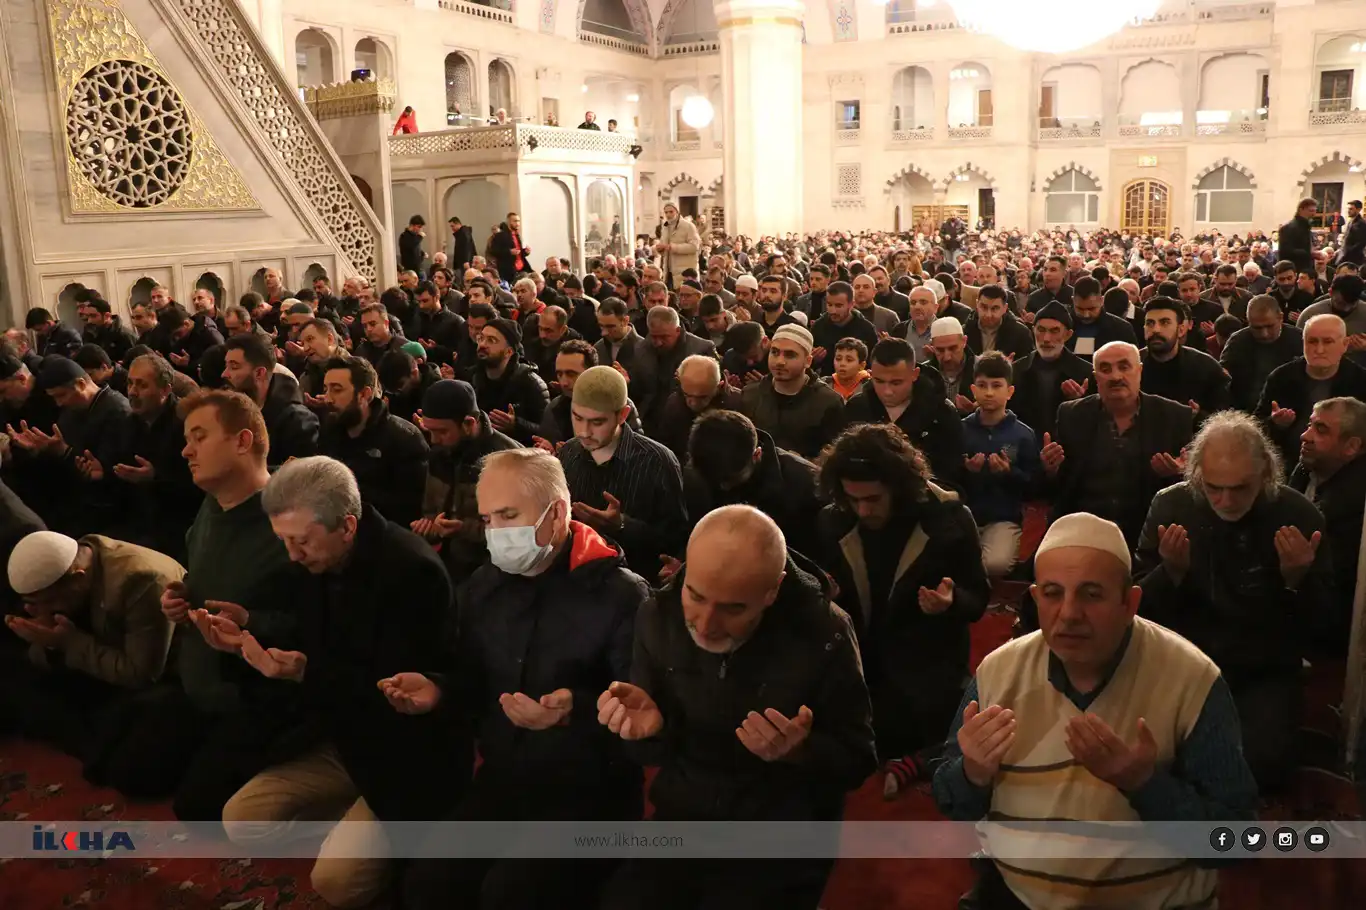 Ankara's mosques abuzz with devotion on Night of Forgiveness